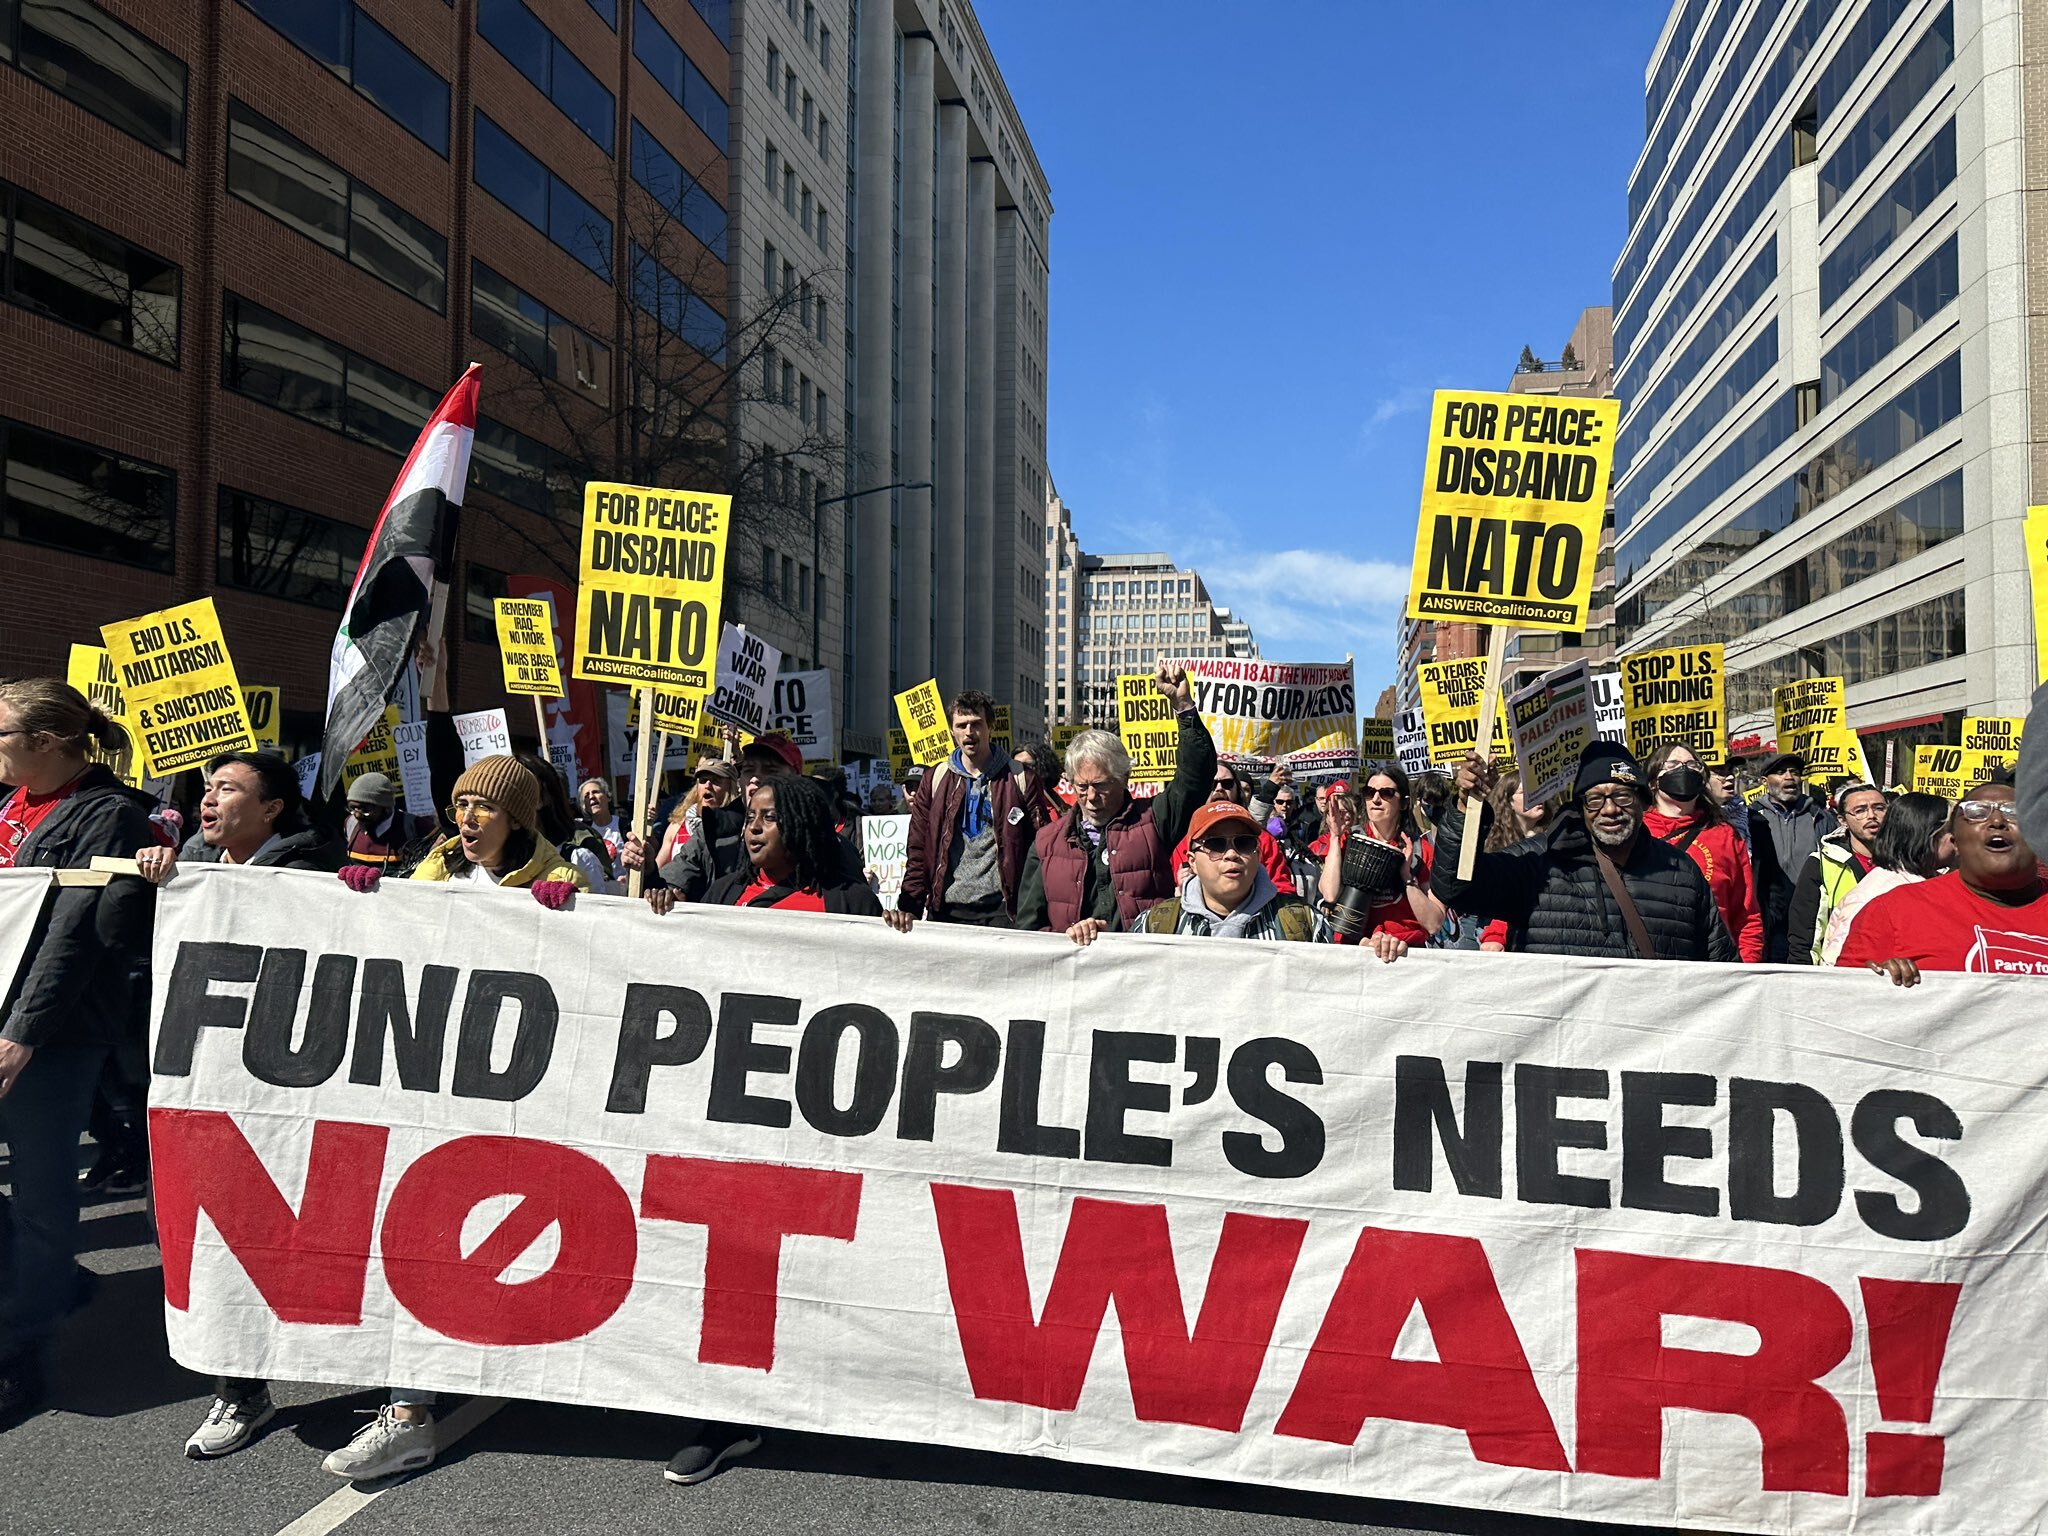 Thousands march in Washington, D.C. to launch new movement against U.S. empire – Liberation News